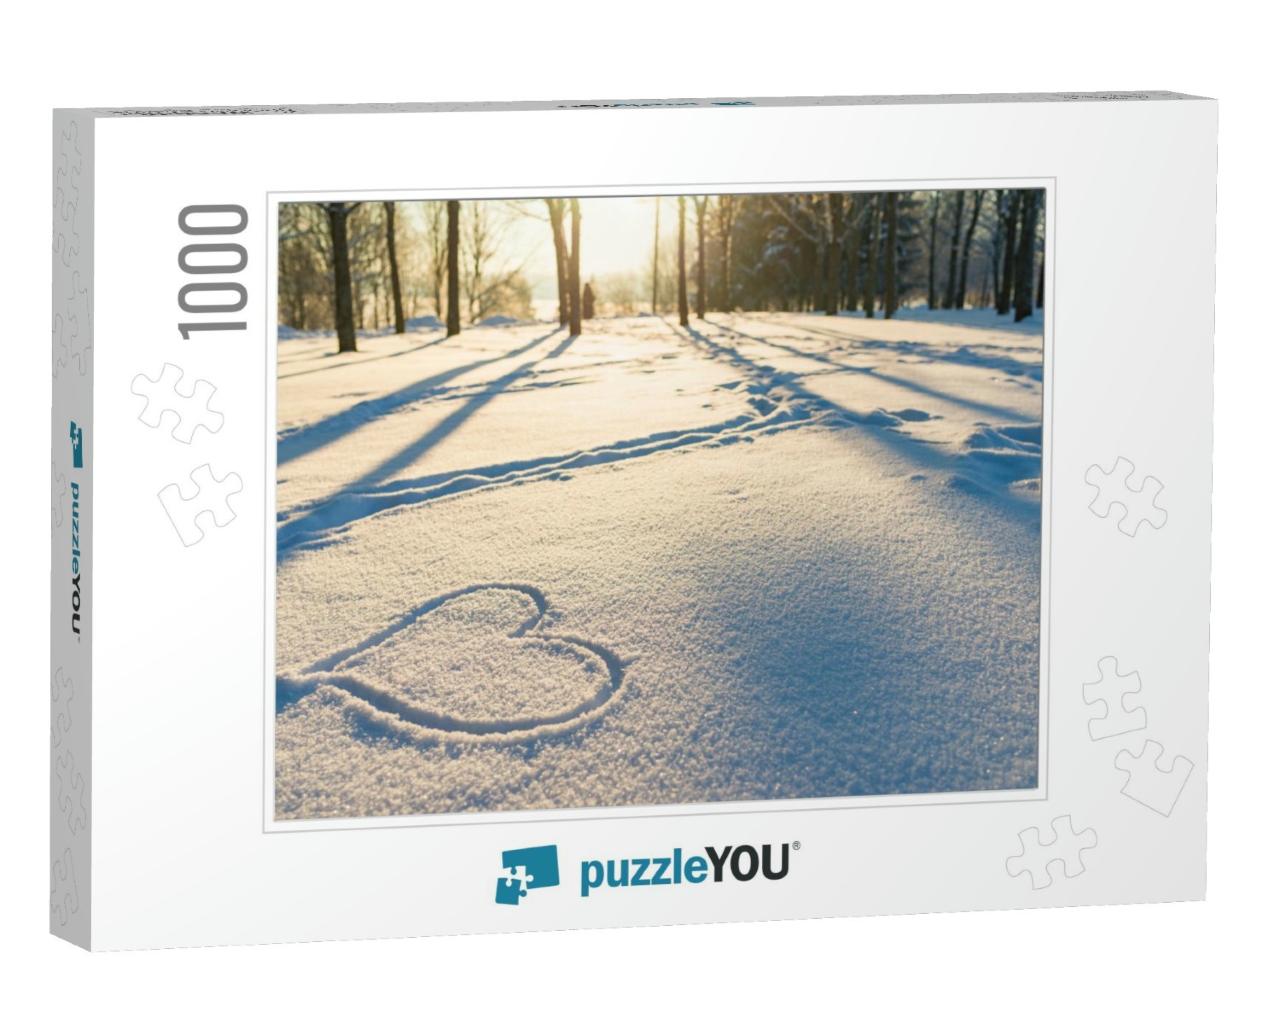 Drawn Heart in a Snow Landscape. Winter Evening Sunset Ni... Jigsaw Puzzle with 1000 pieces